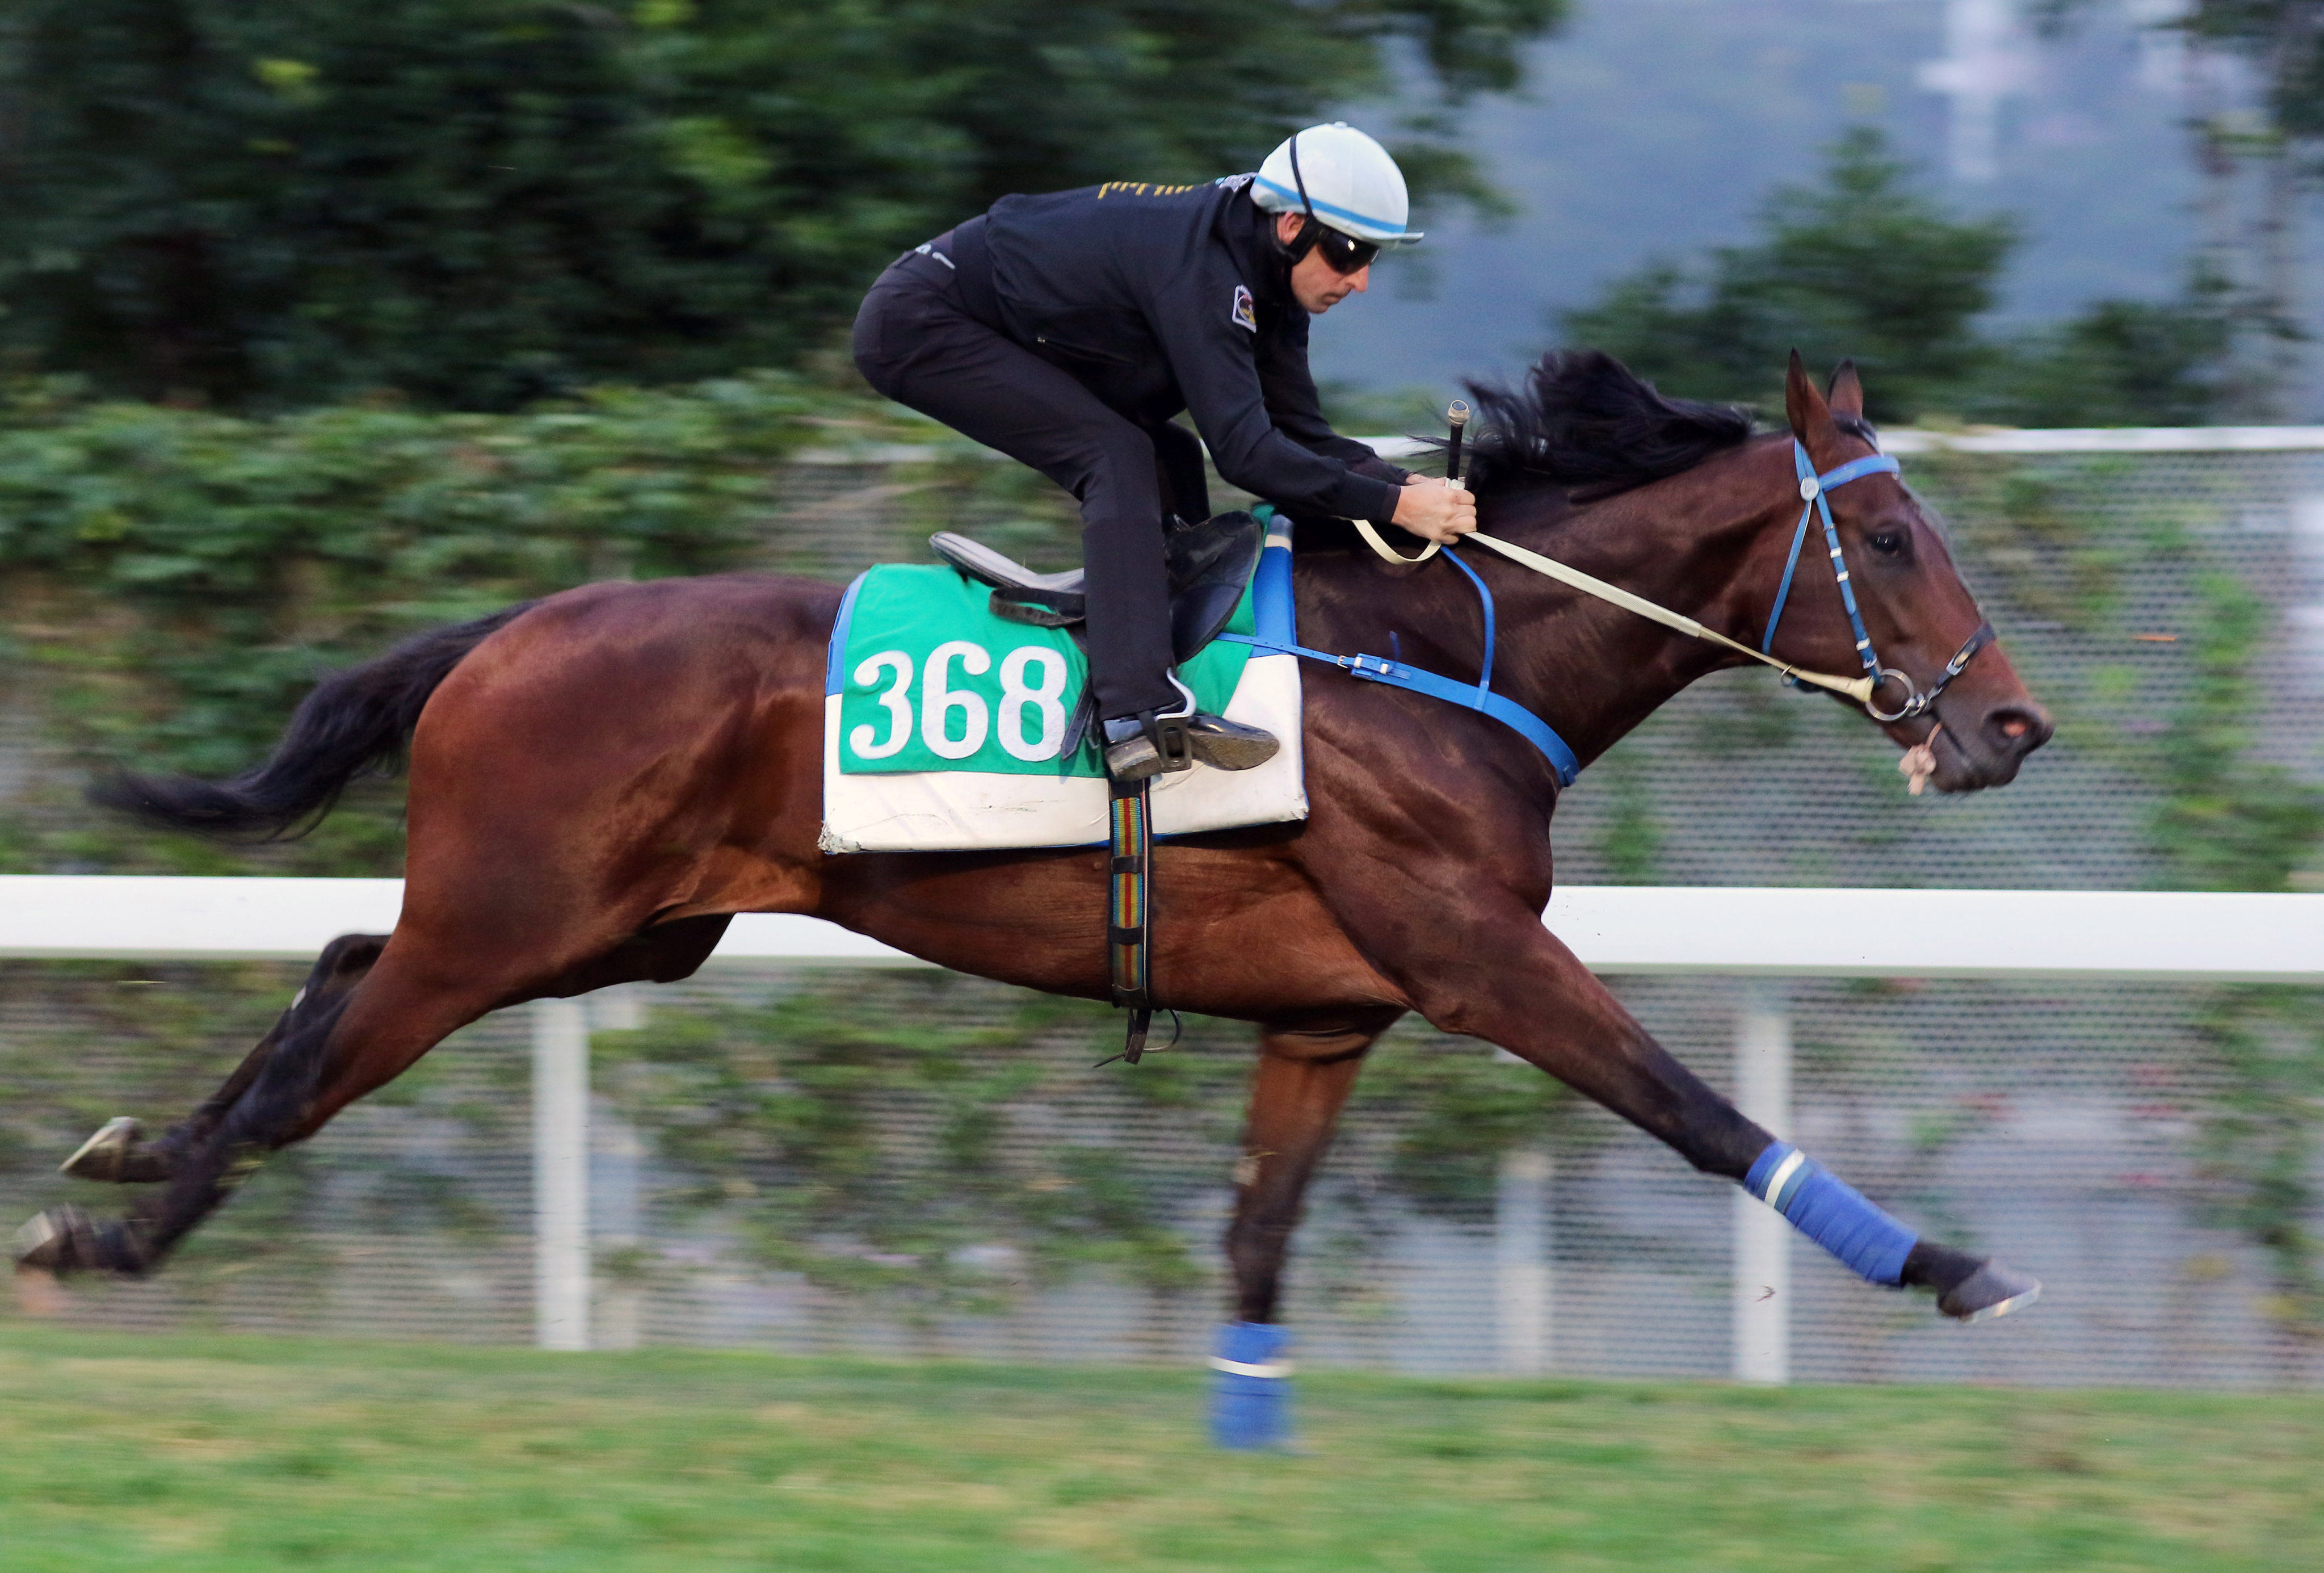 Hugh Bowman gallops Caspar Fownes-trained imported entire Viva Chaleur at Sha Tin on Thursday ahead of today’s Class Three (Restricted) Lung Fu Shan Handicap (1,600m). Photos: Kenneth Chan